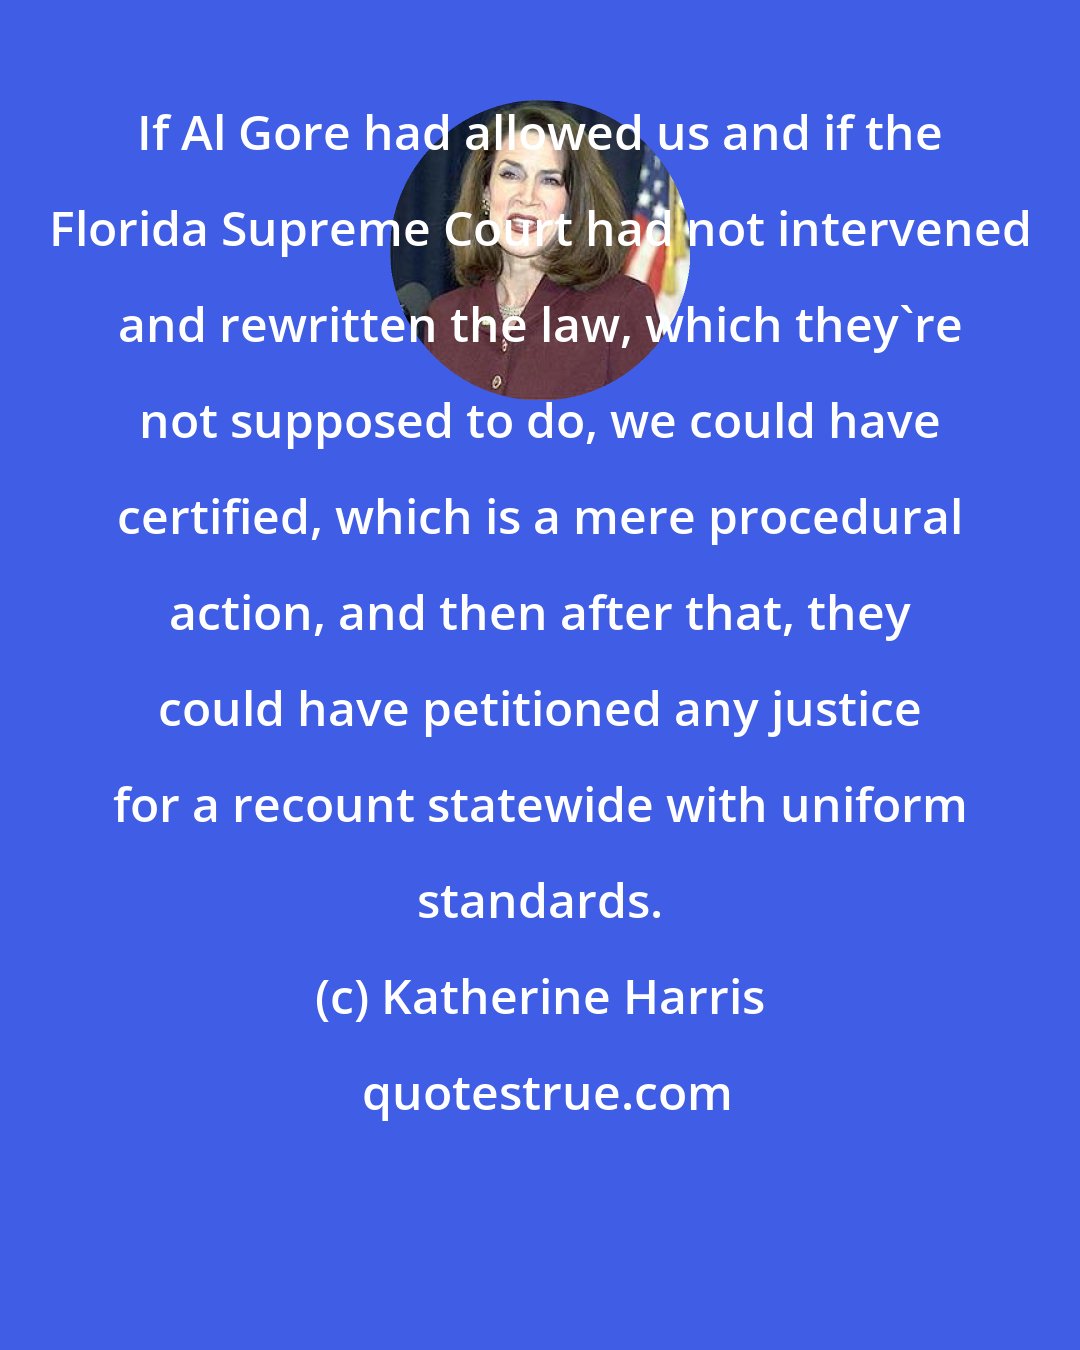 Katherine Harris: If Al Gore had allowed us and if the Florida Supreme Court had not intervened and rewritten the law, which they're not supposed to do, we could have certified, which is a mere procedural action, and then after that, they could have petitioned any justice for a recount statewide with uniform standards.